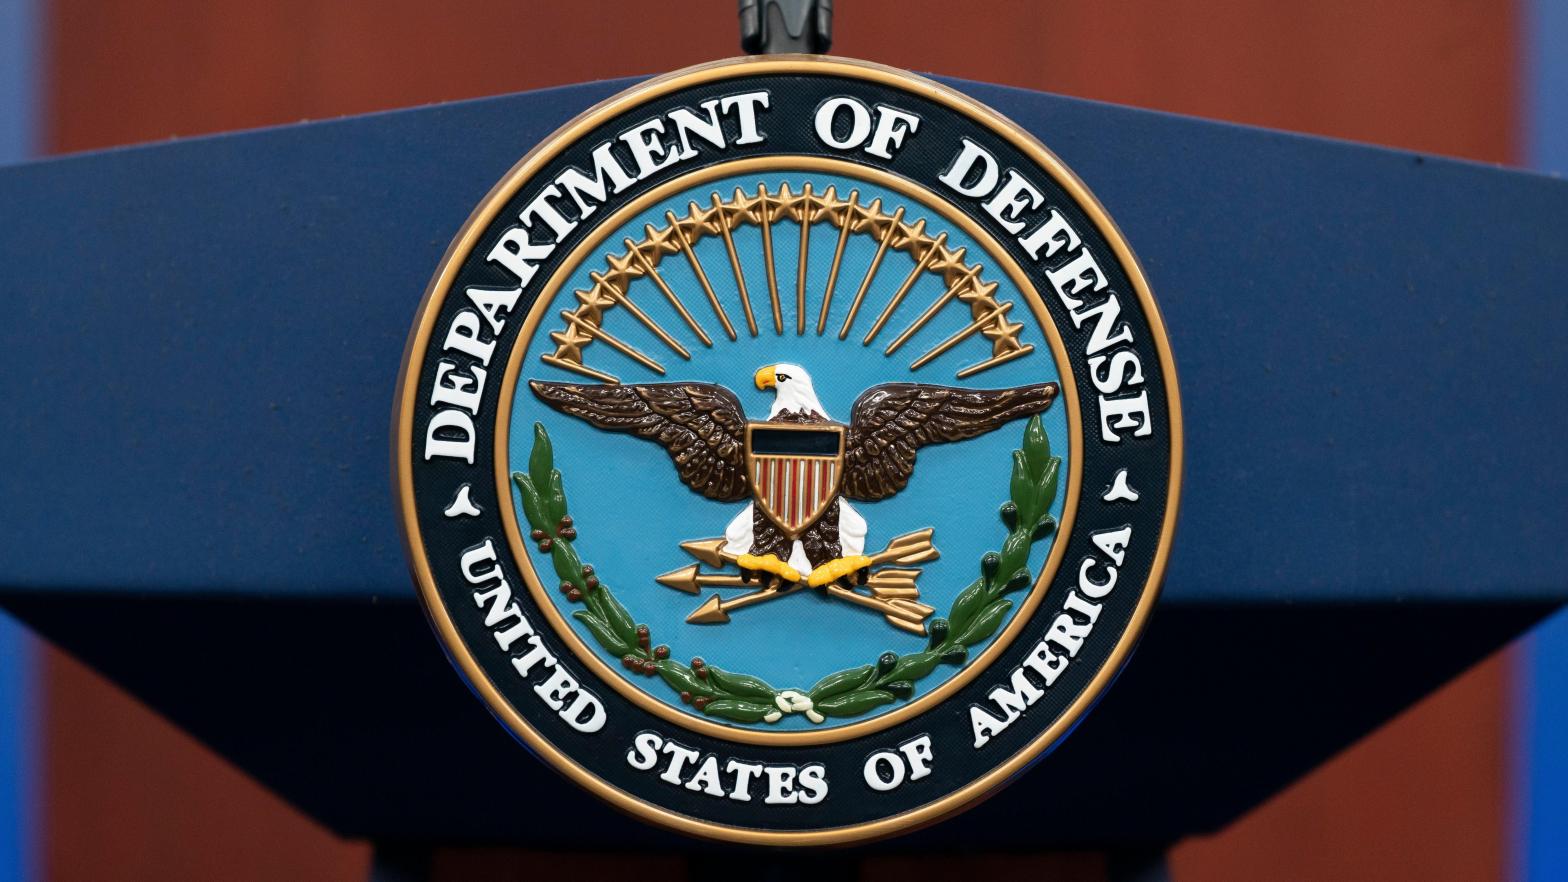 The seal of the Department of Defence is seen on a podium ahead of a media briefing at the Pentagon, Tuesday, Sept. 27, 2022, in Washington. (Photo: Alex Brandon, AP)